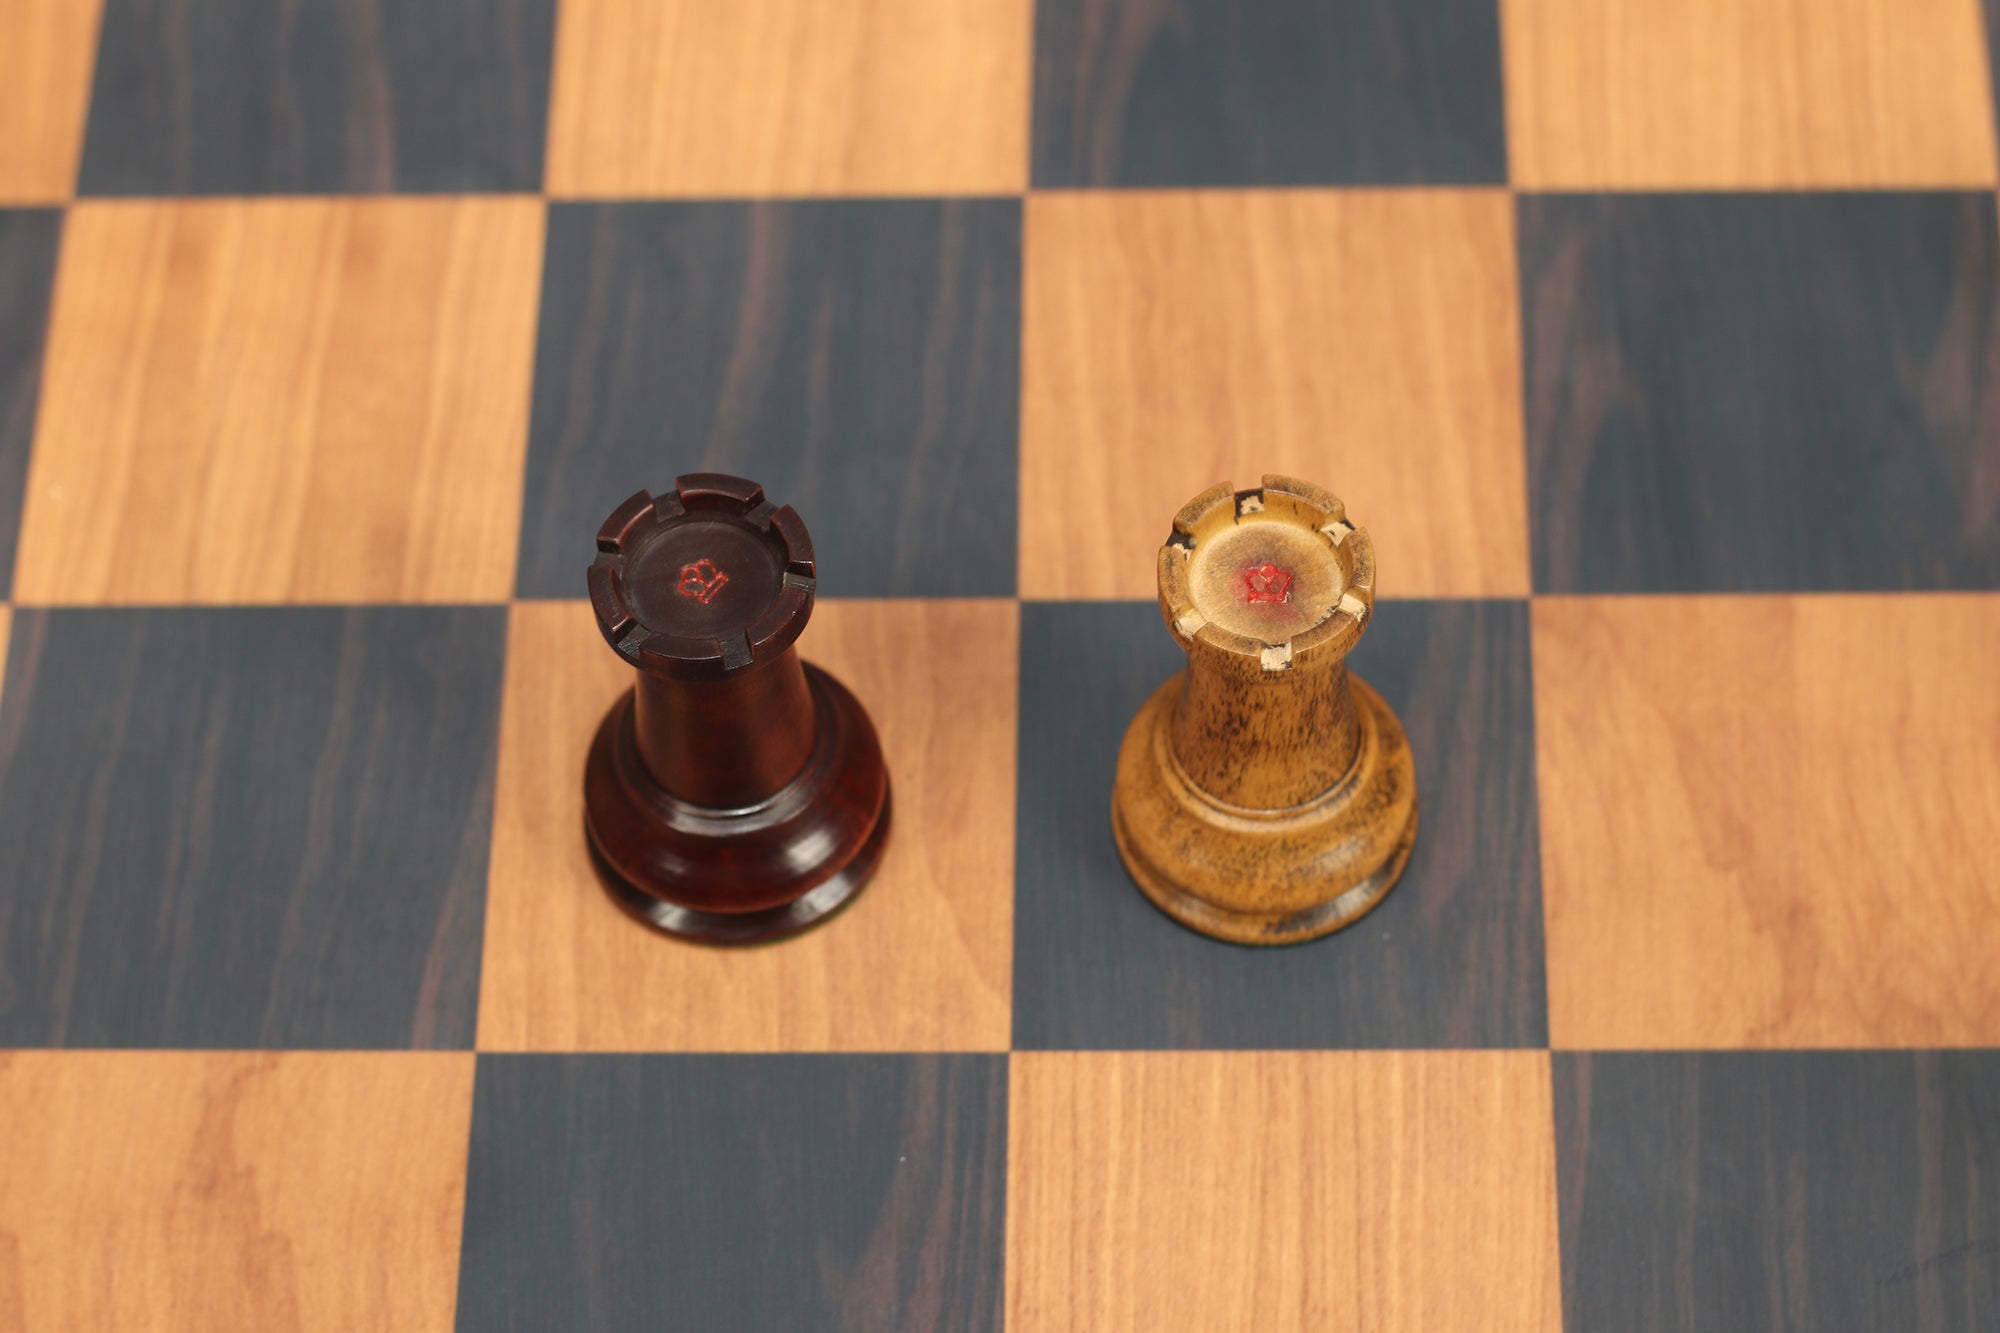 Morphy Cooke 1849-50 Vintage 3.5" Reproduction Chess Set in Distressed Boxwood/Mahogany Stained